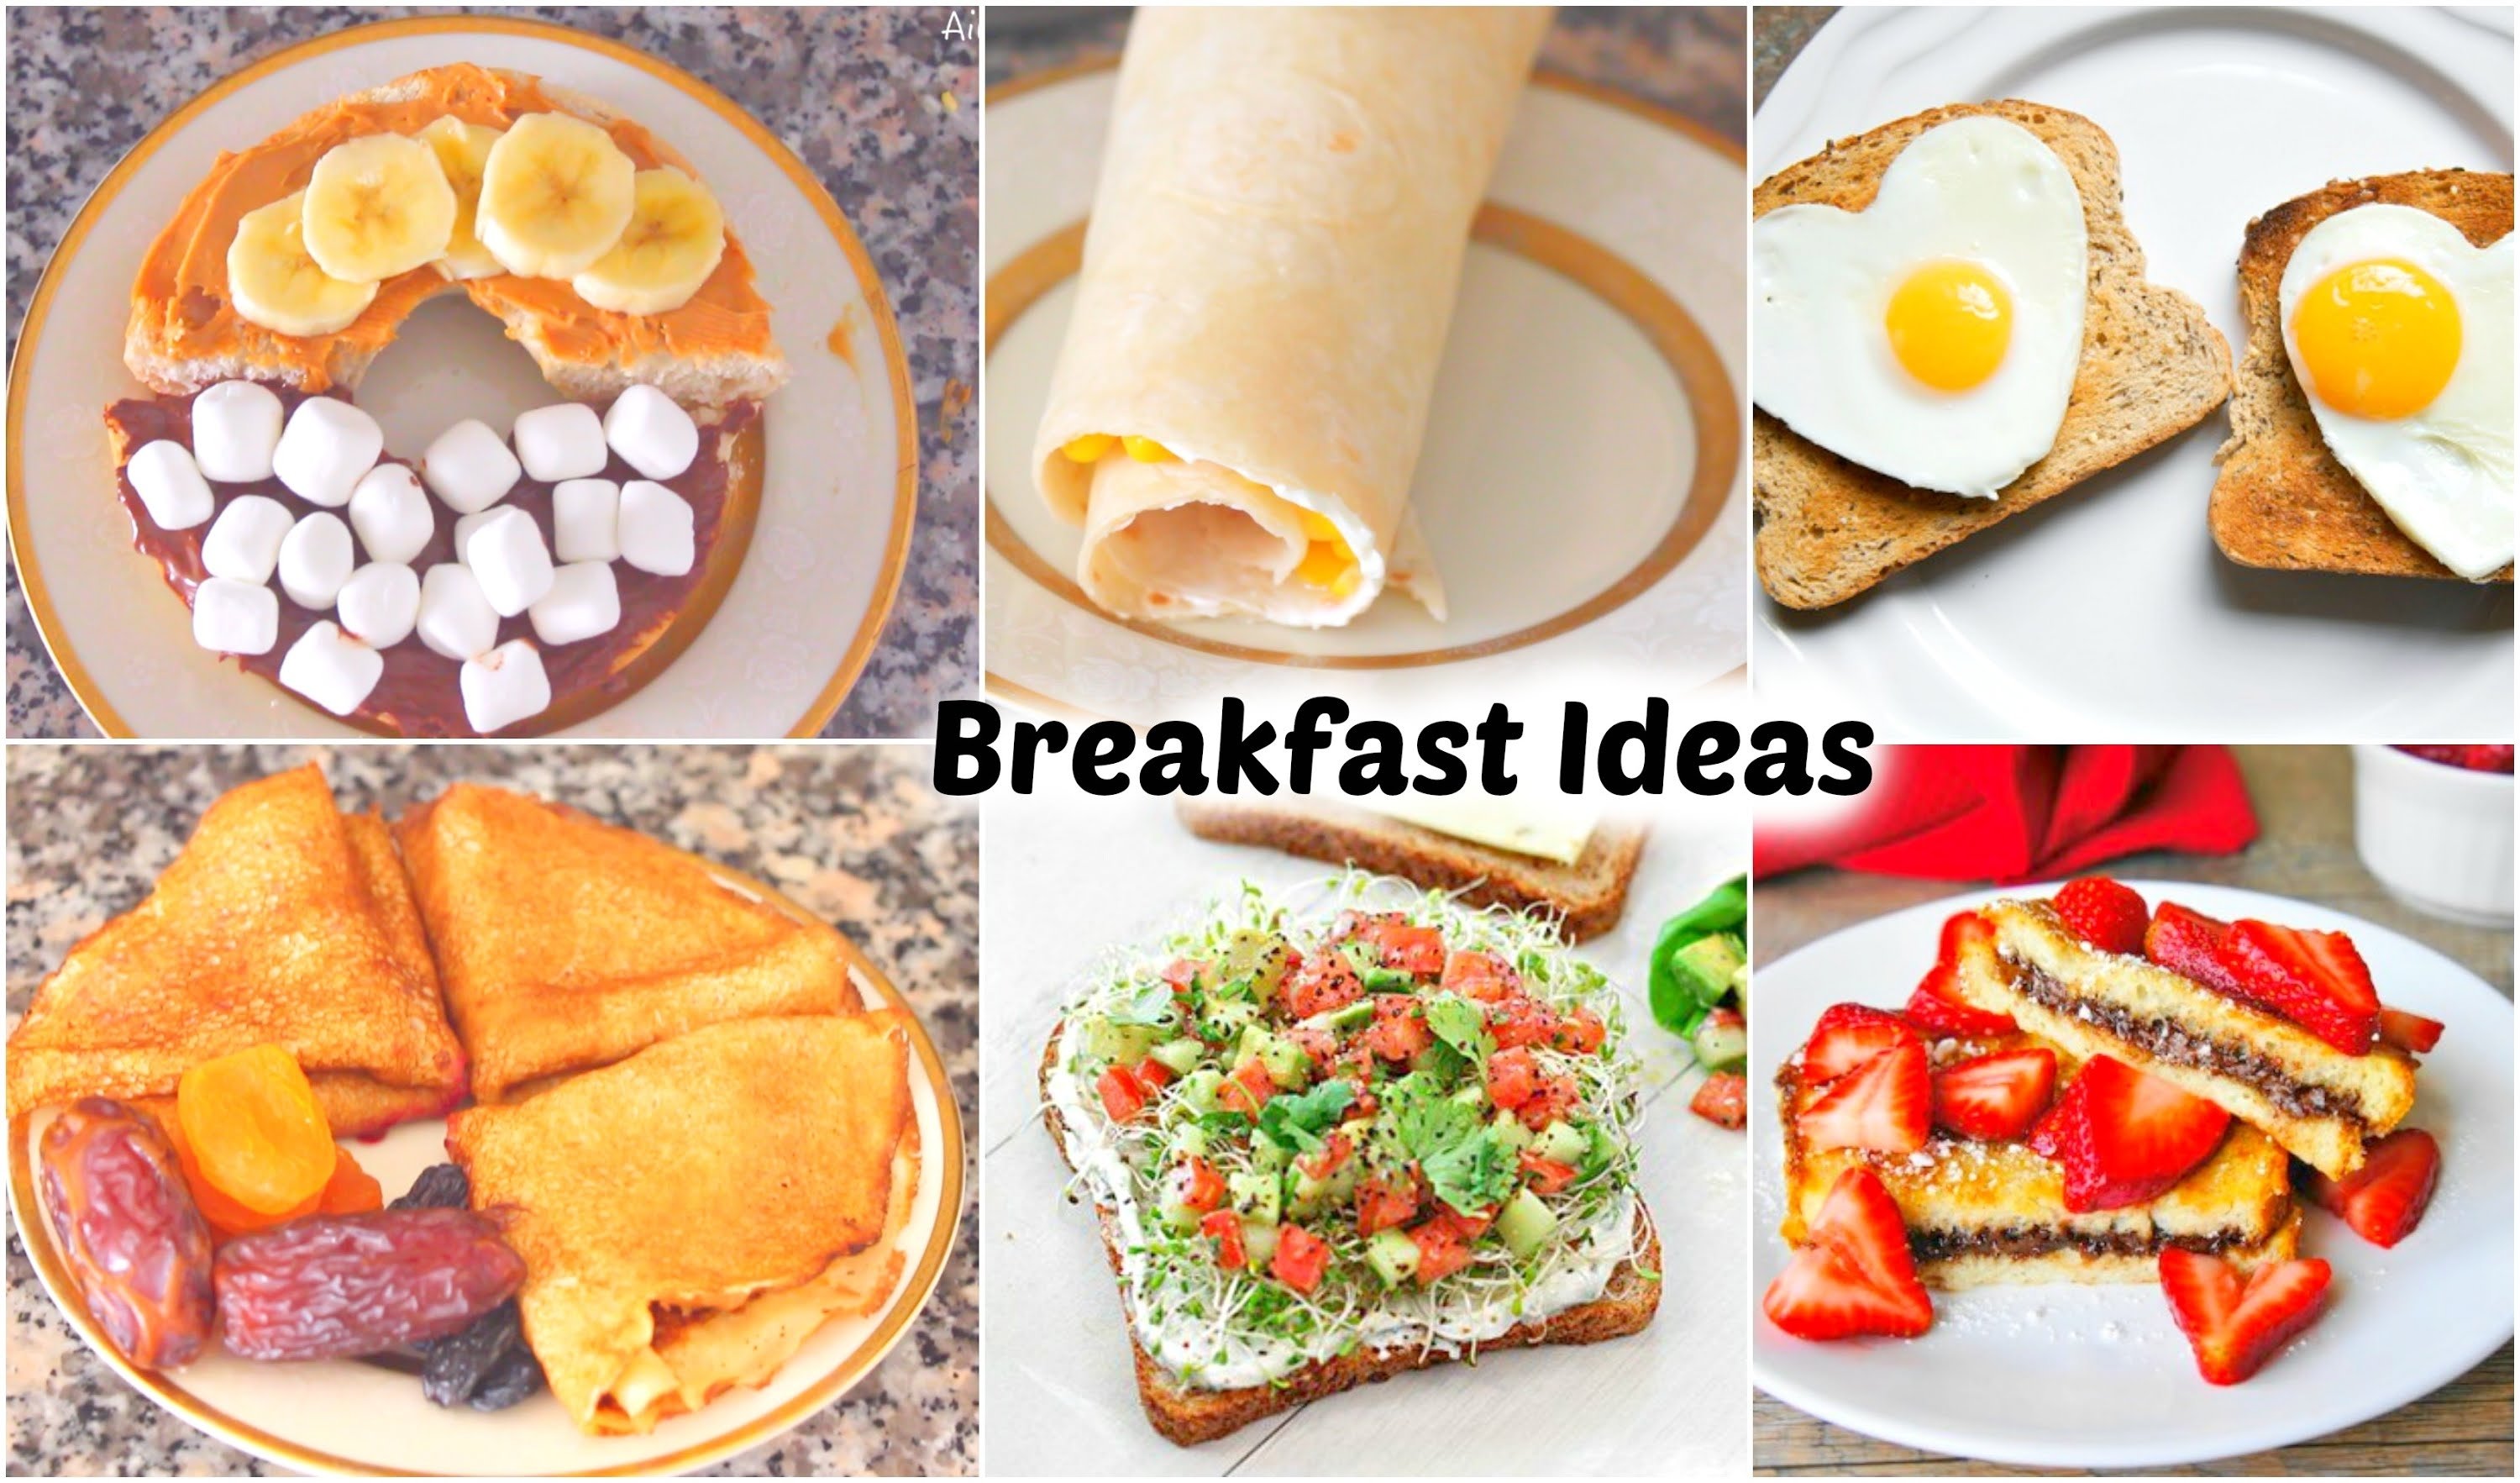 10 Awesome Quick Healthy Breakfast Ideas On The Go healthy quick breakfast ideas youtube 1 2022